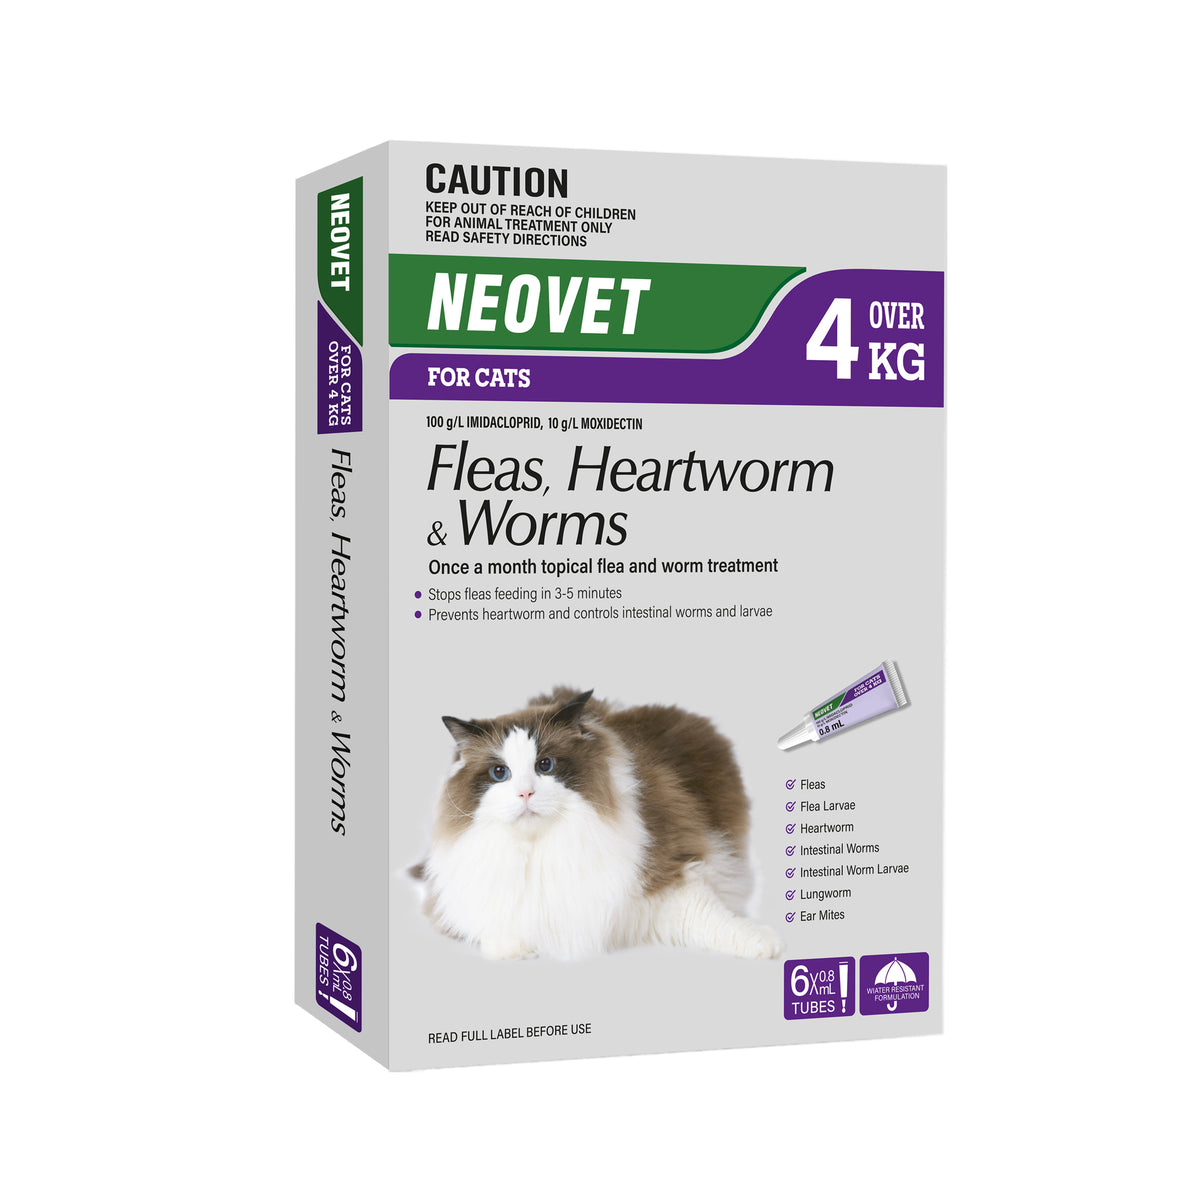 Neovet for Cats (Fleas, Heartworm &amp; Worms) over 4kg